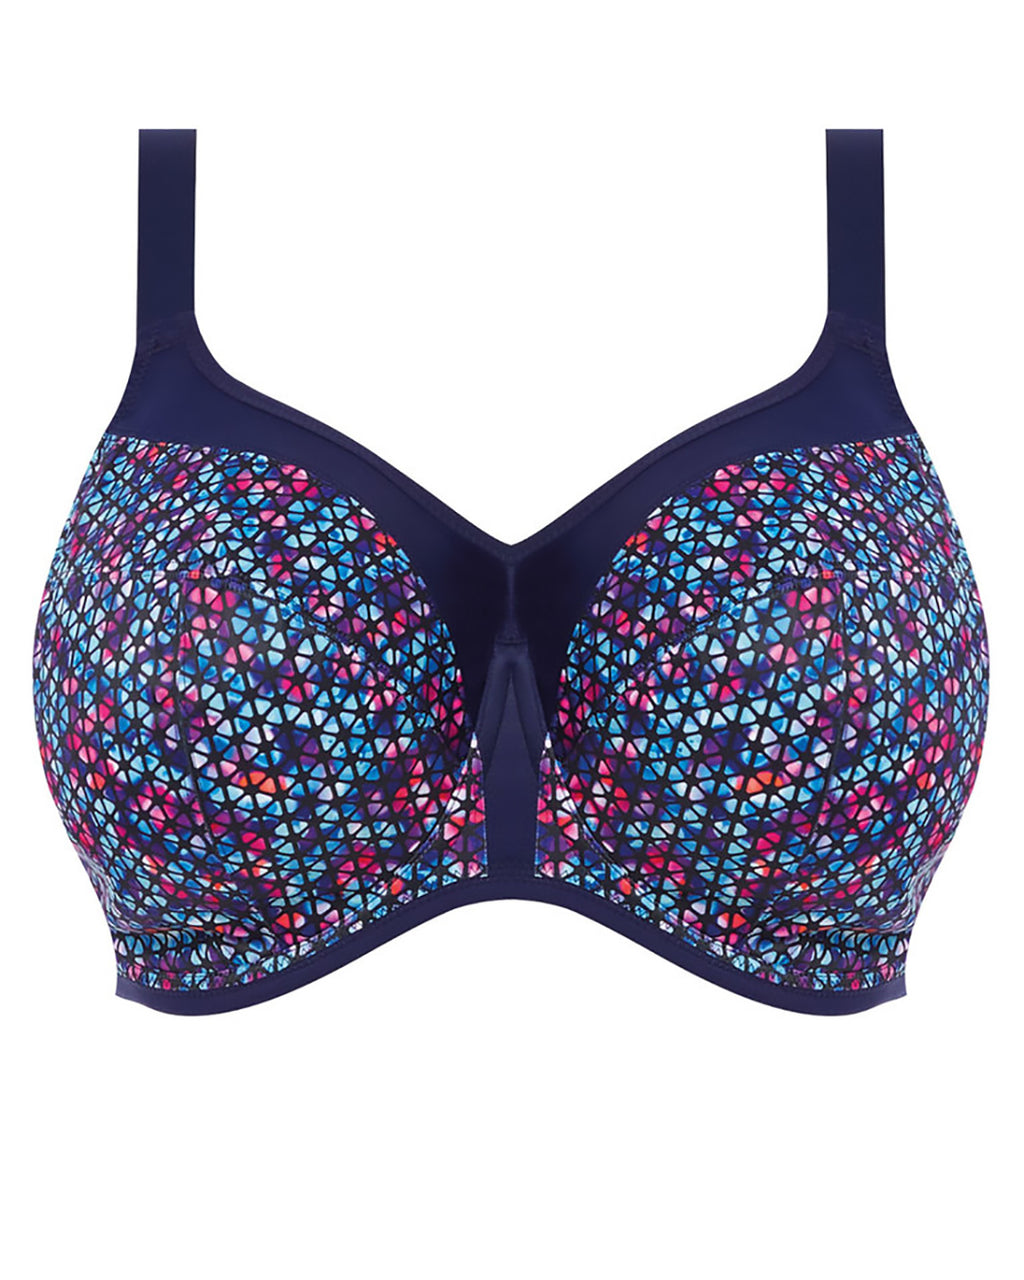 NWT YEAR OF Ours Daisy Samba Sports Bra carbon38 Anthropologie